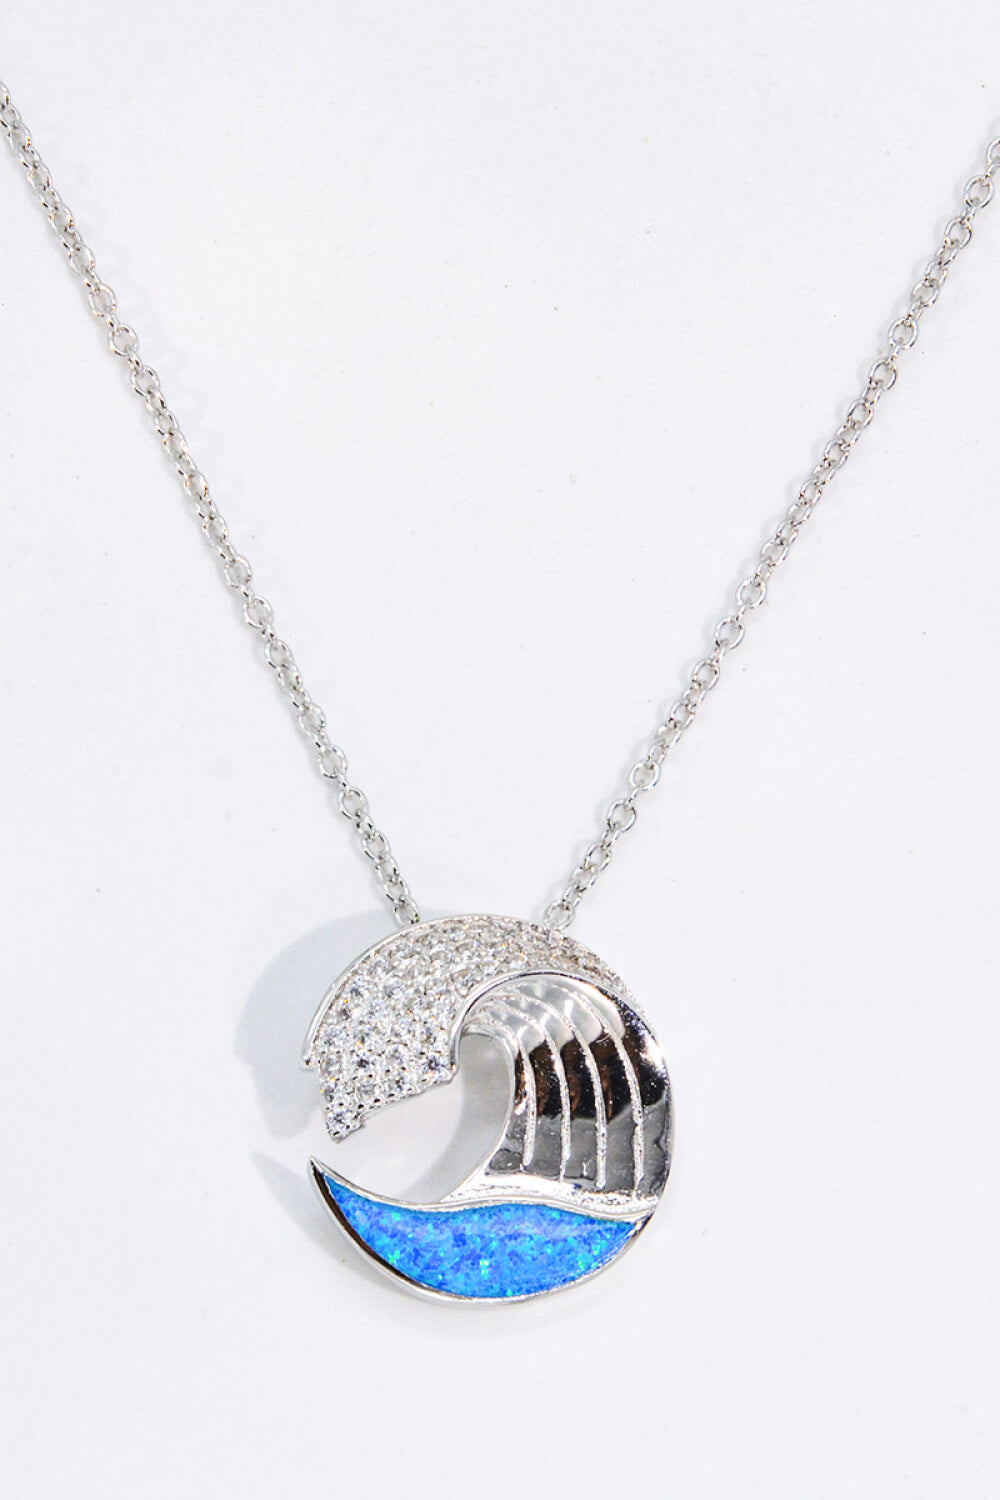 Opal and Zircon Wave Pendant Necklace - Necklaces - FITGGINS